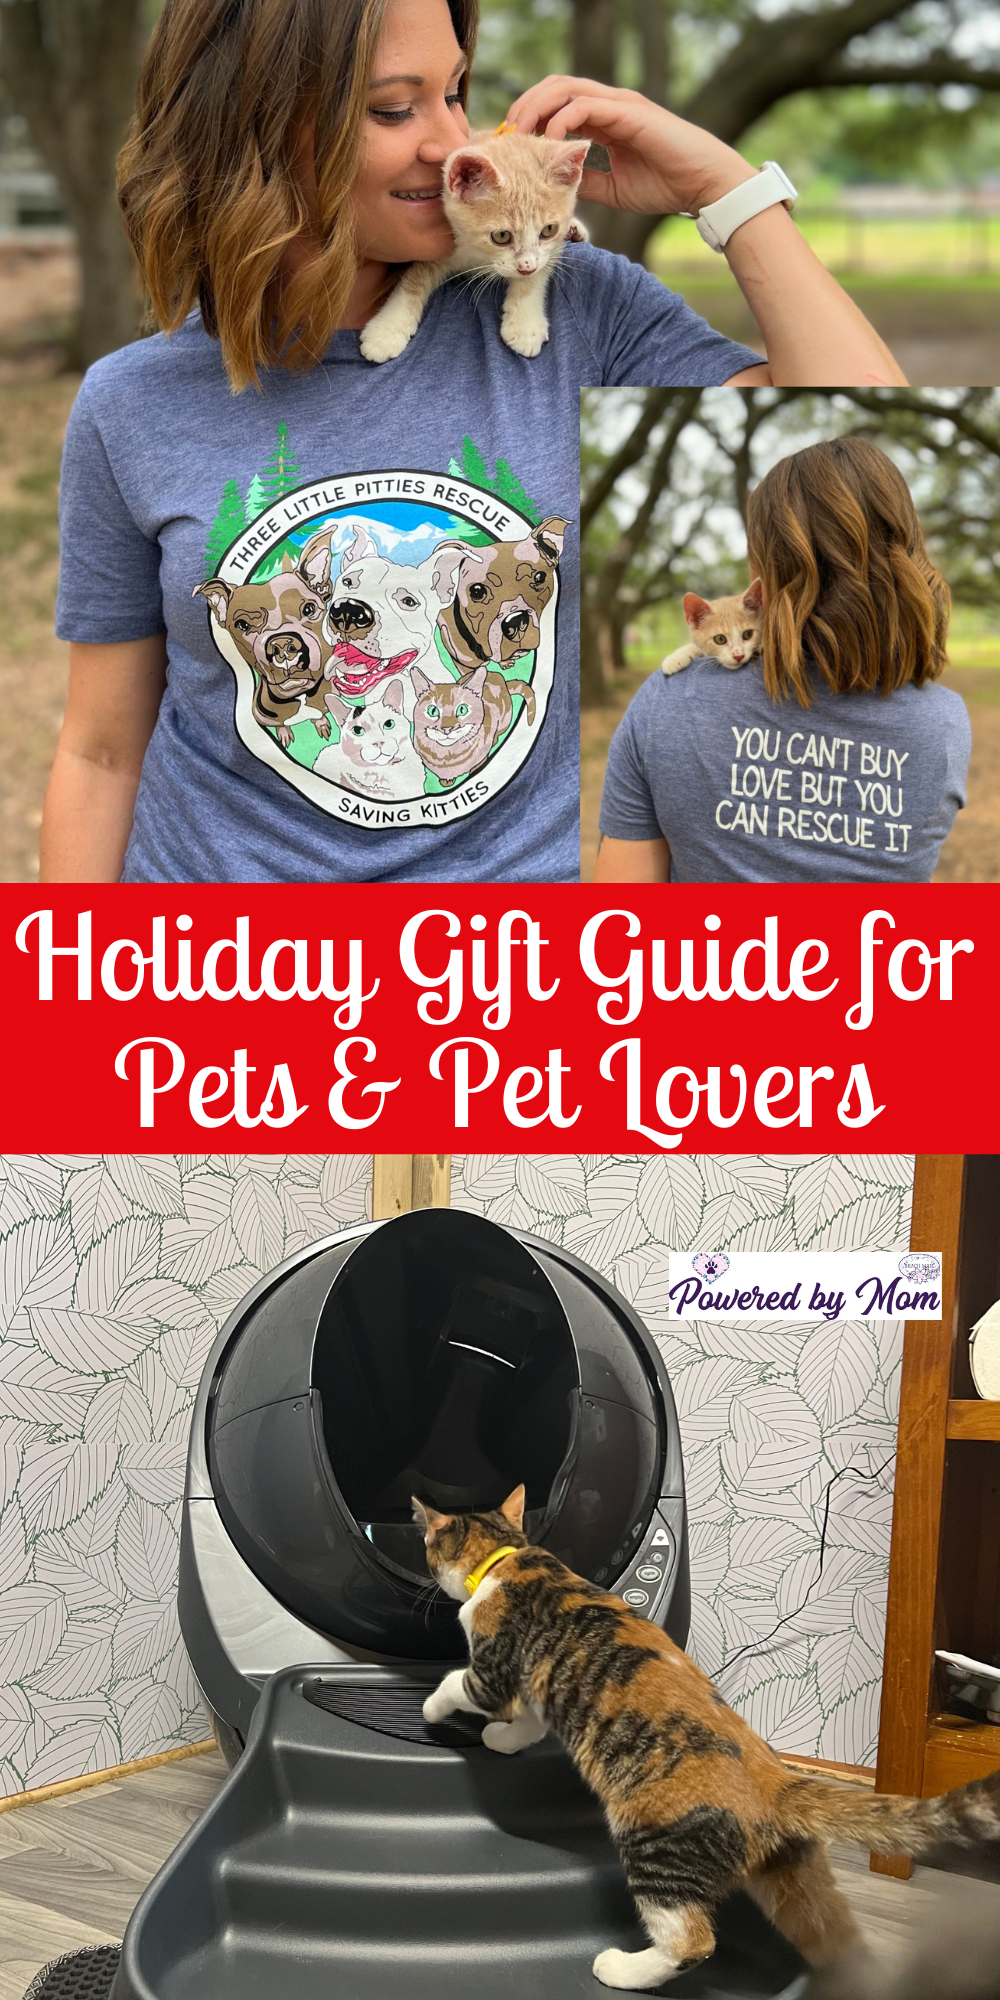 Find a gift for your beloved pets (cats and dogs) and/or the pet lovers in your life. Our pets are a part of the family.